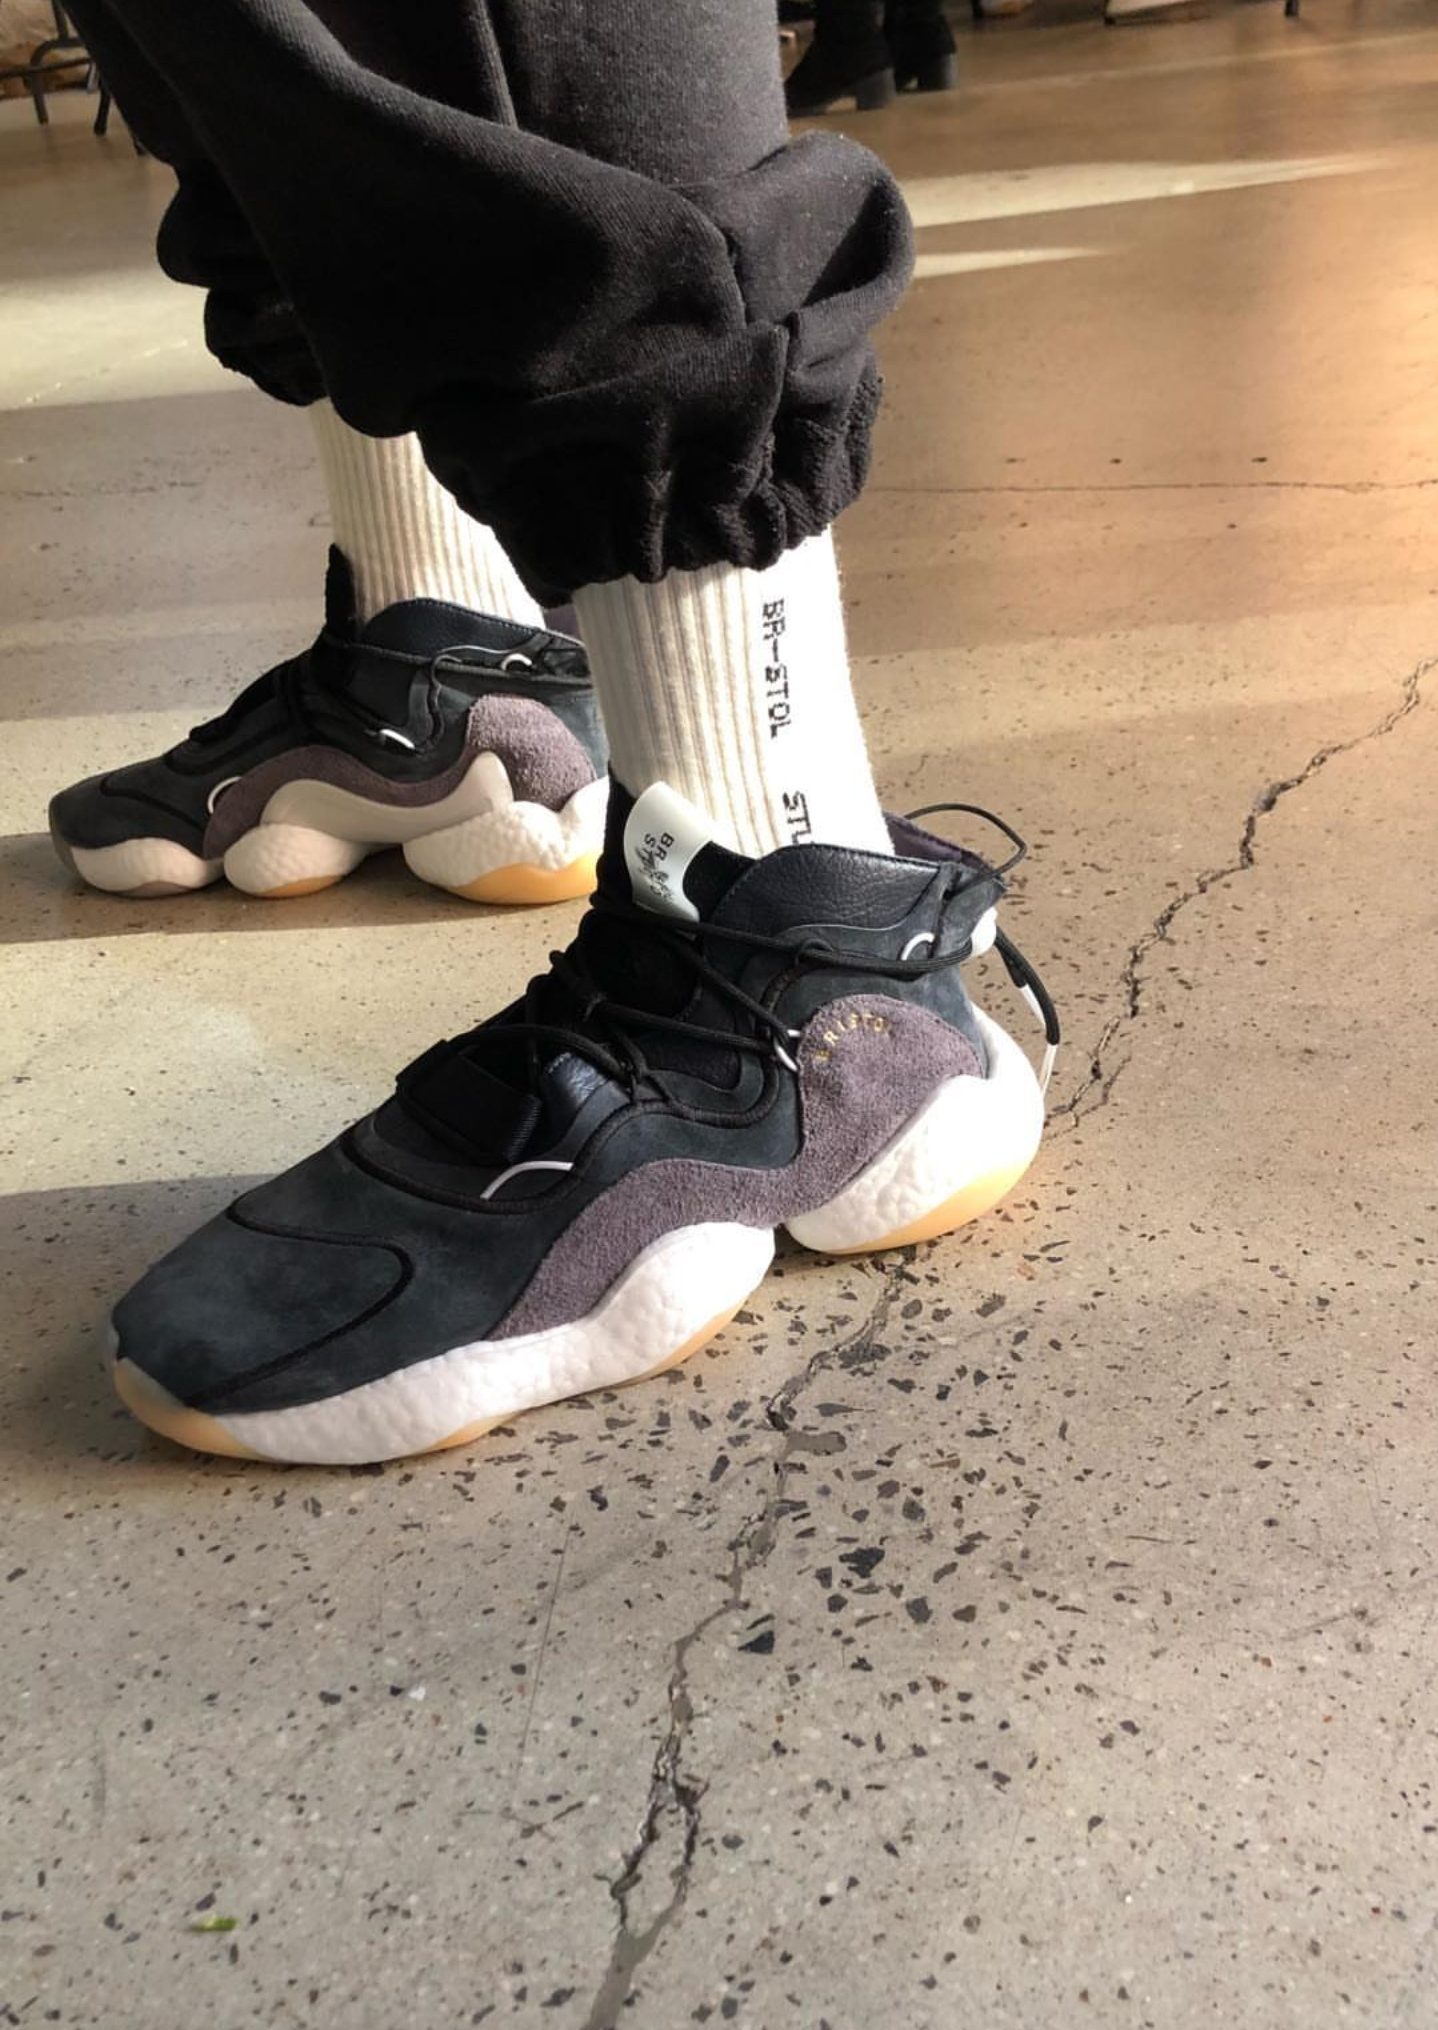 Bristol Studio Teases adidas Crazy BYW Collaborations - WearTesters